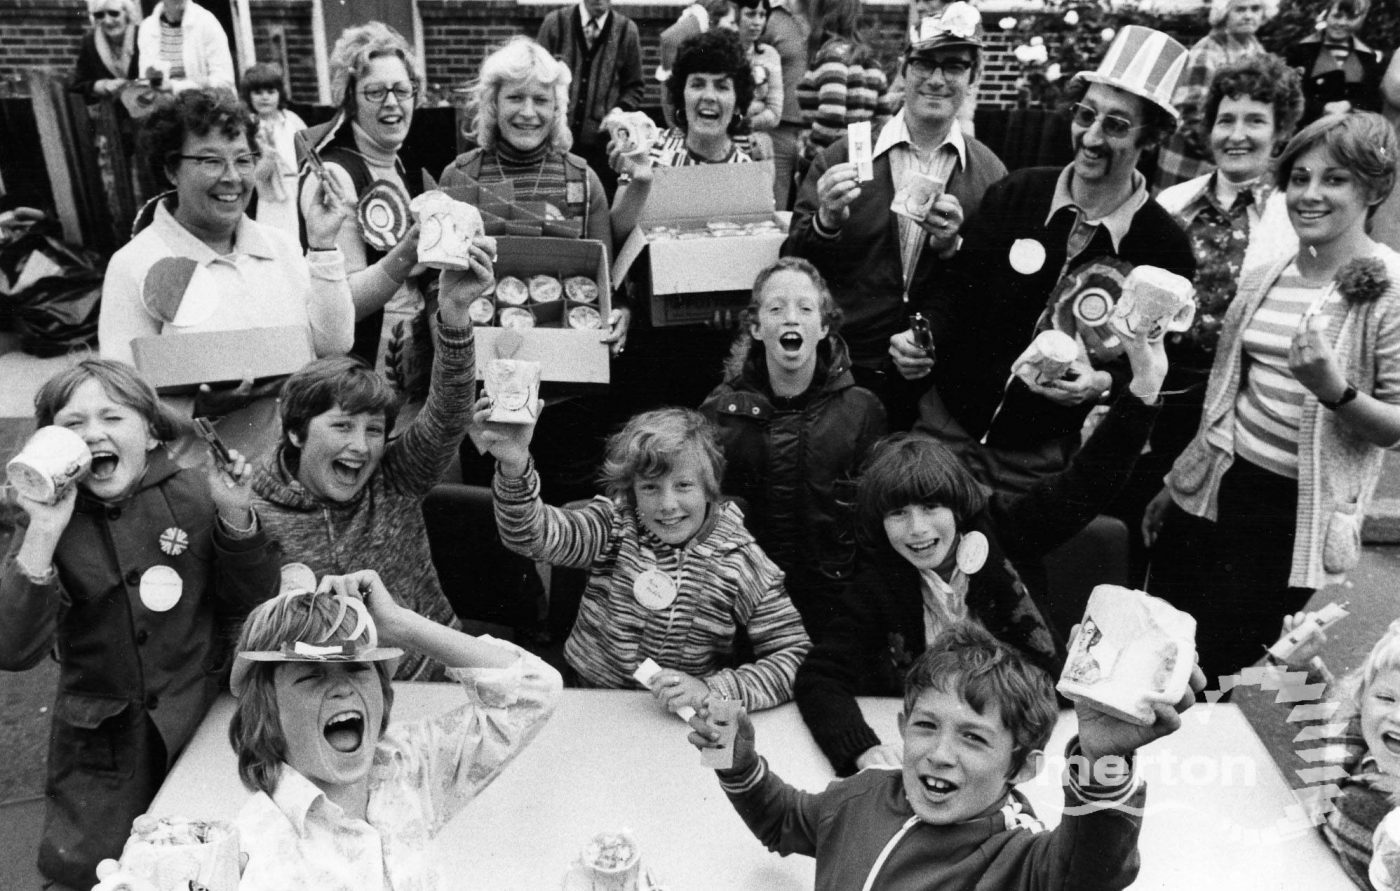 Heritage Image of children at a street party to celebrate the queens silver jubilee in 1977